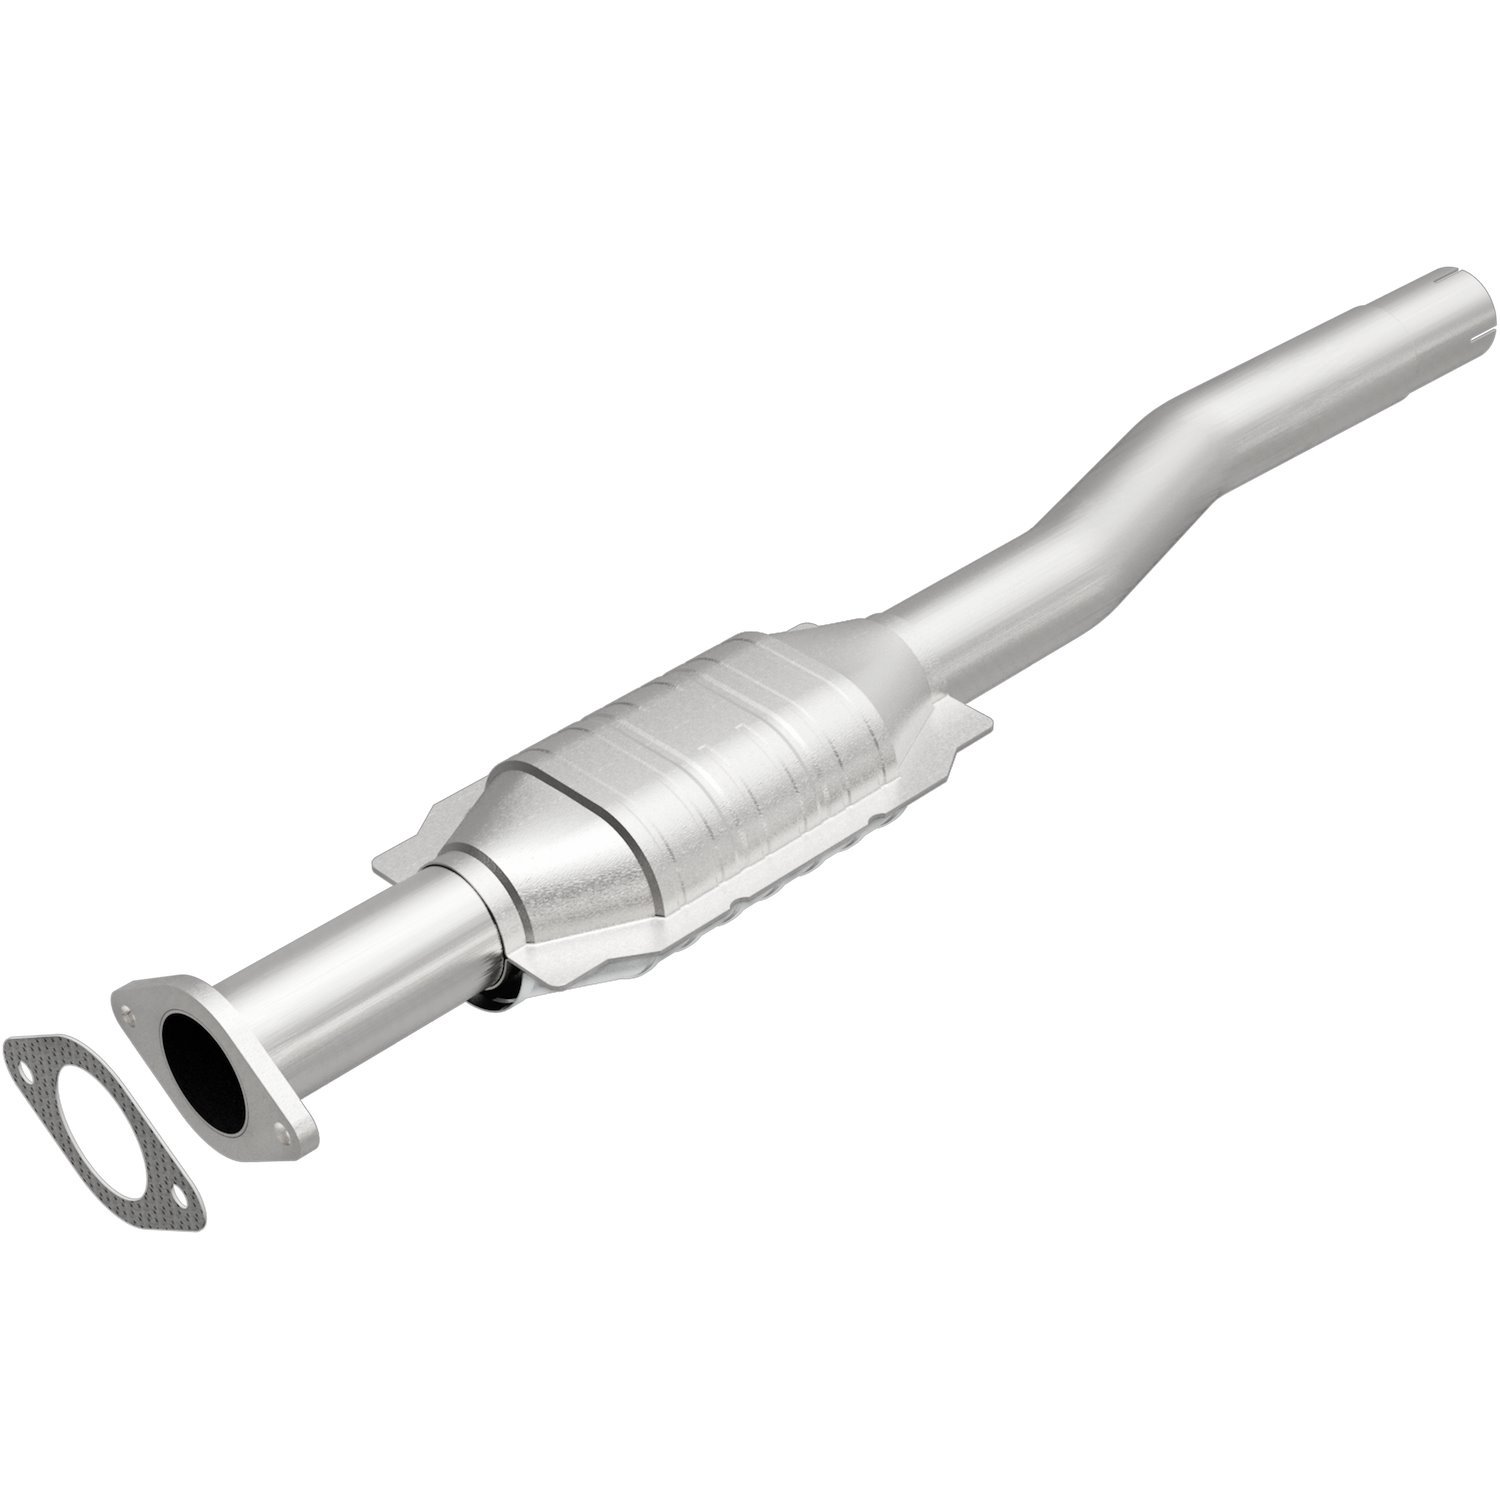 OEM Grade Federal / EPA Compliant Direct-Fit Catalytic Converter 51804